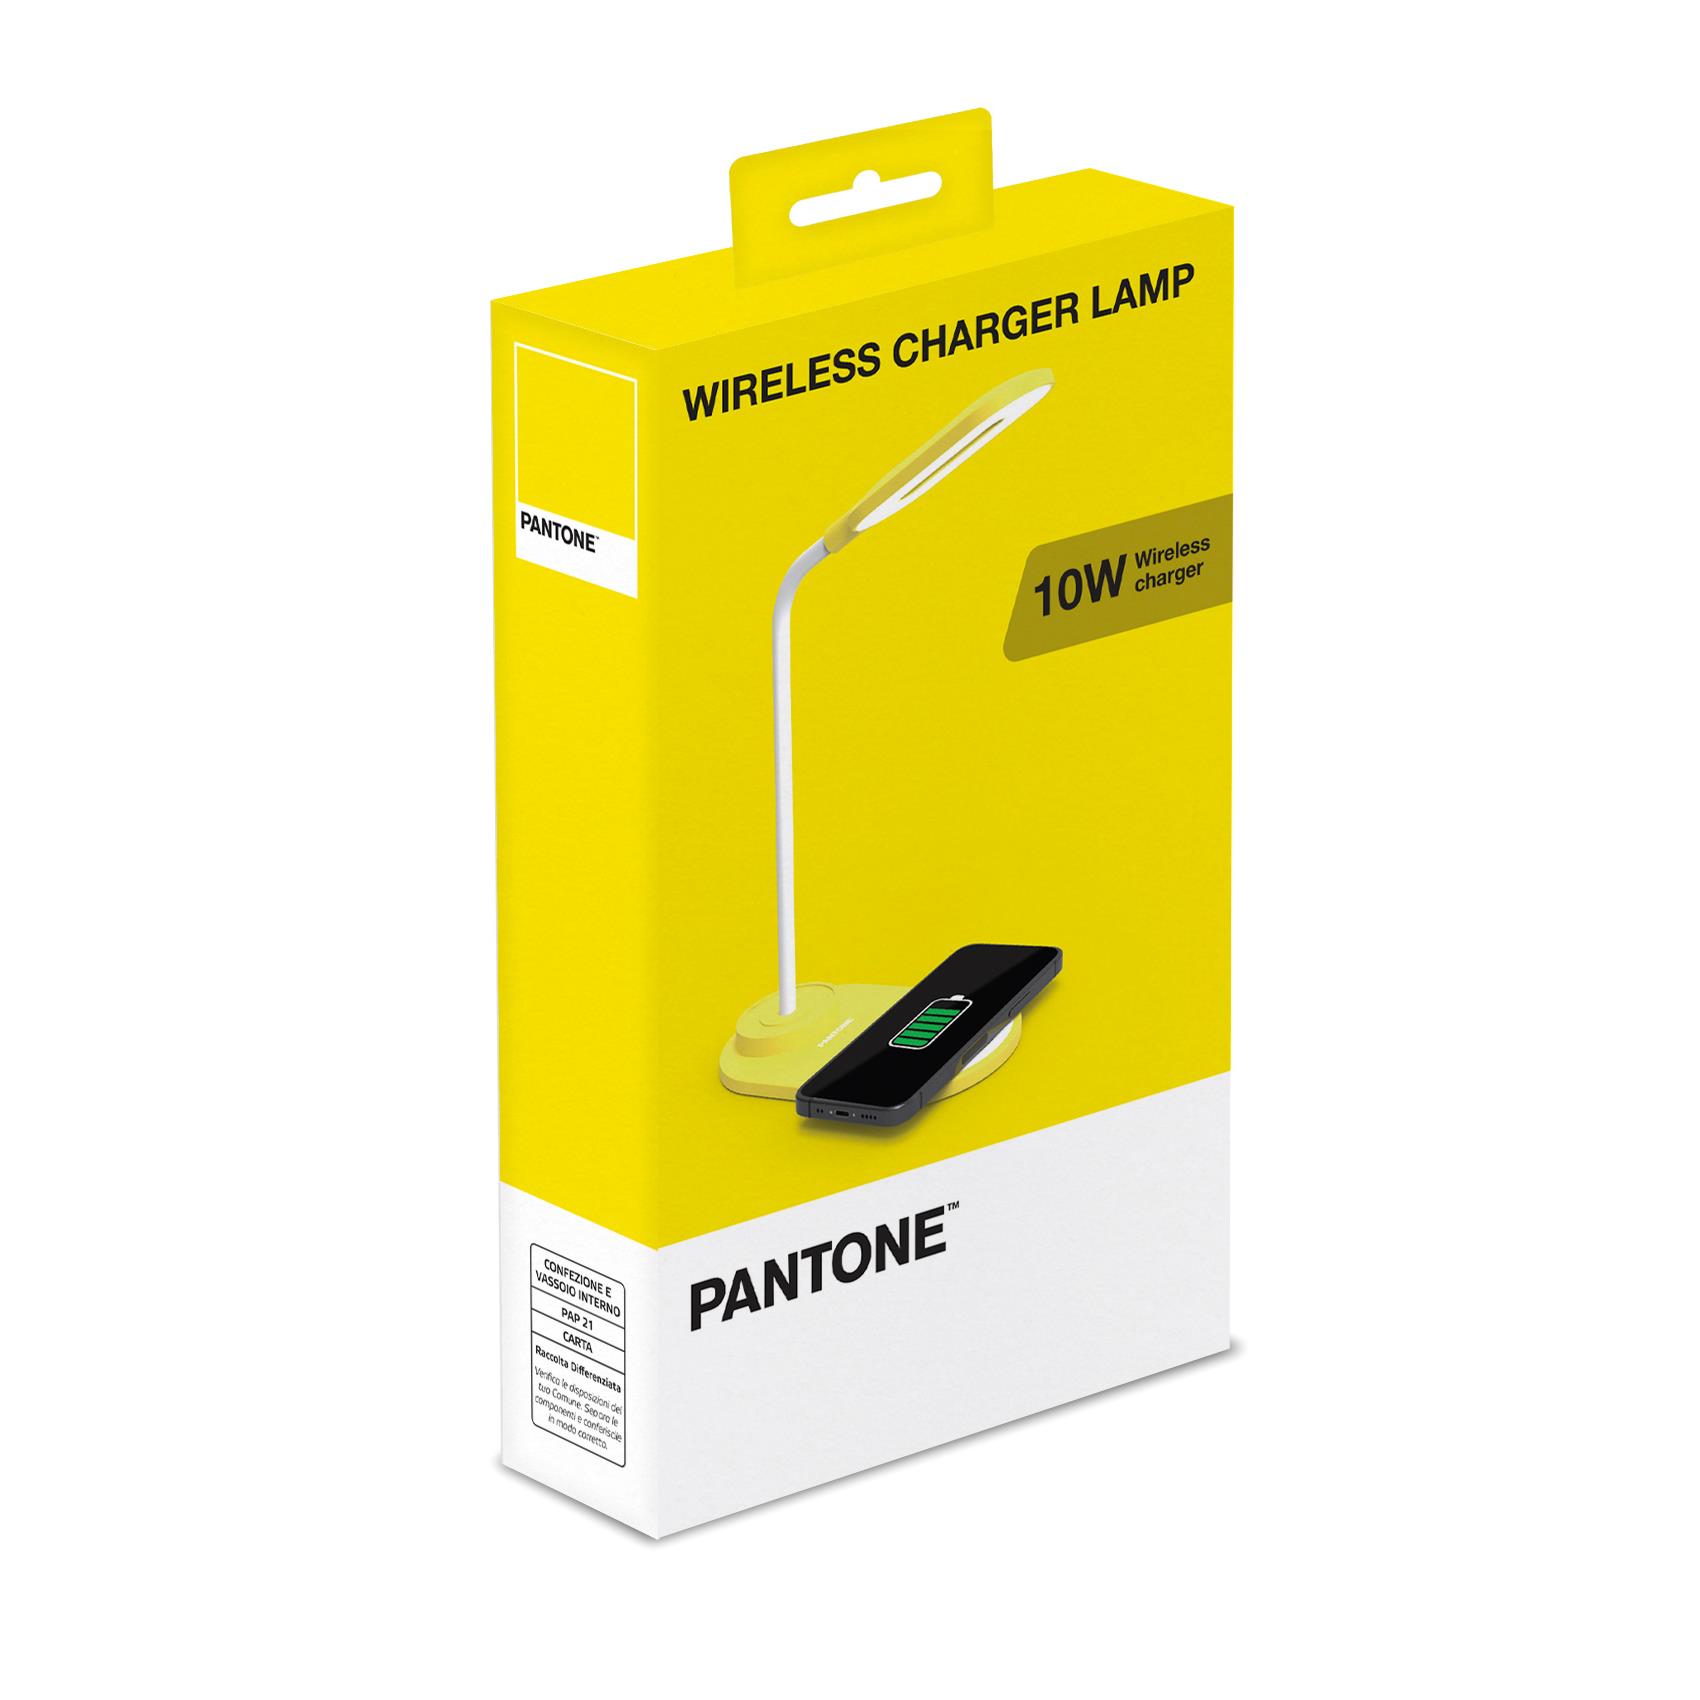 Wireless Charger Lamp Mini Yw Pantone Pt Ld001y 4713213365311